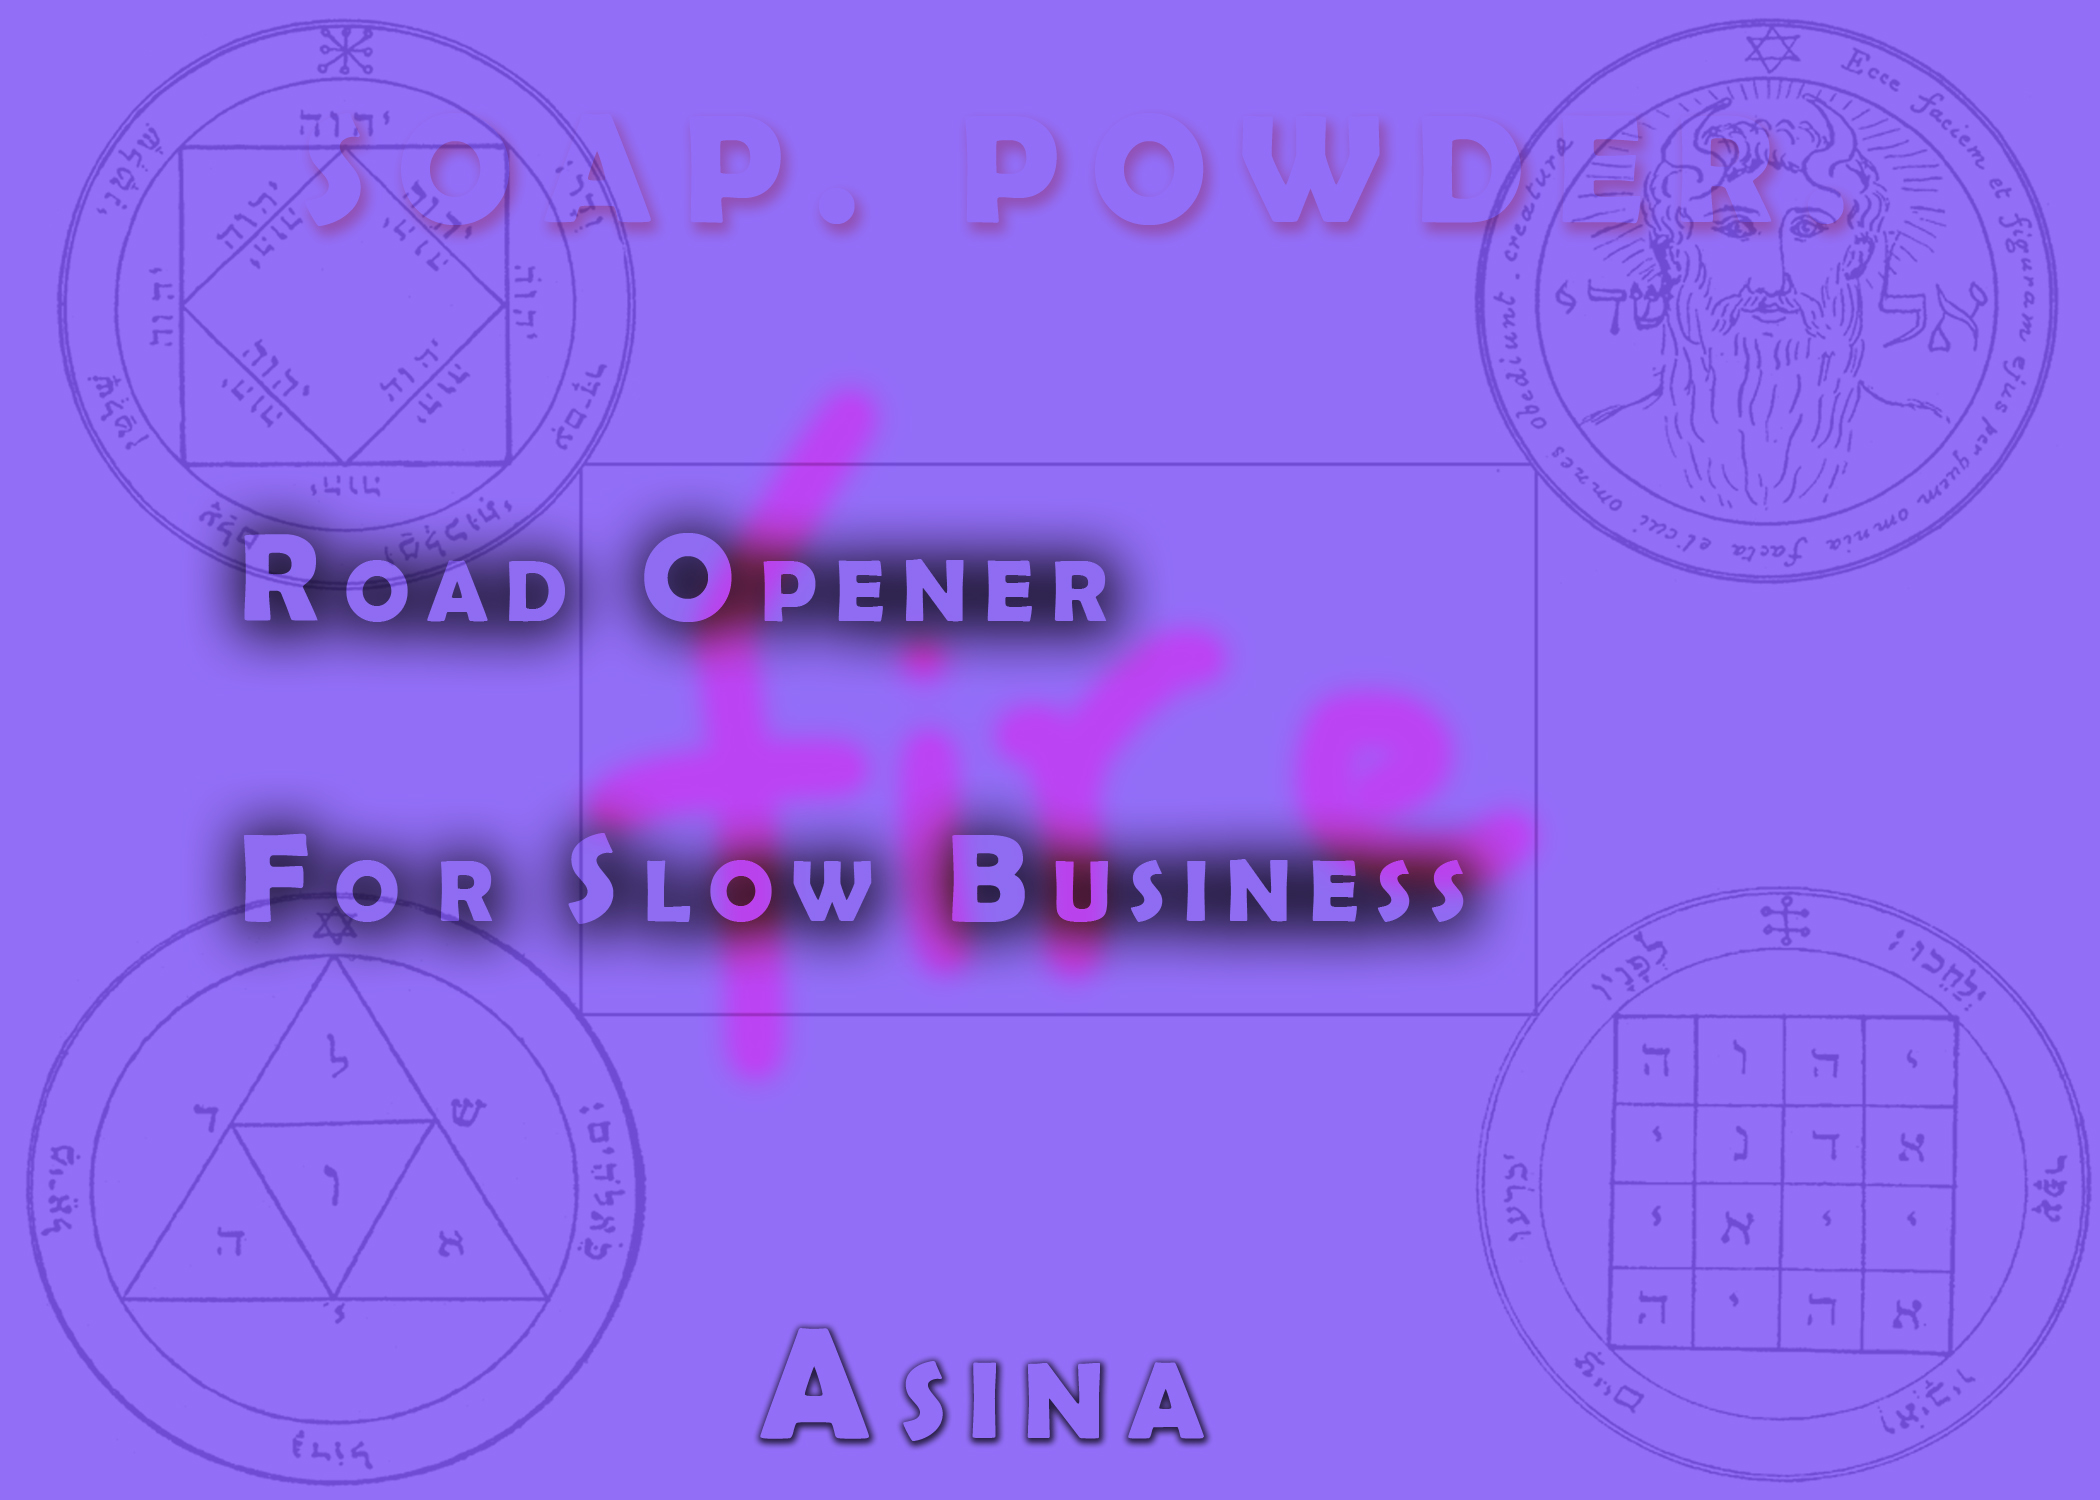 Road Opener For Slow Business